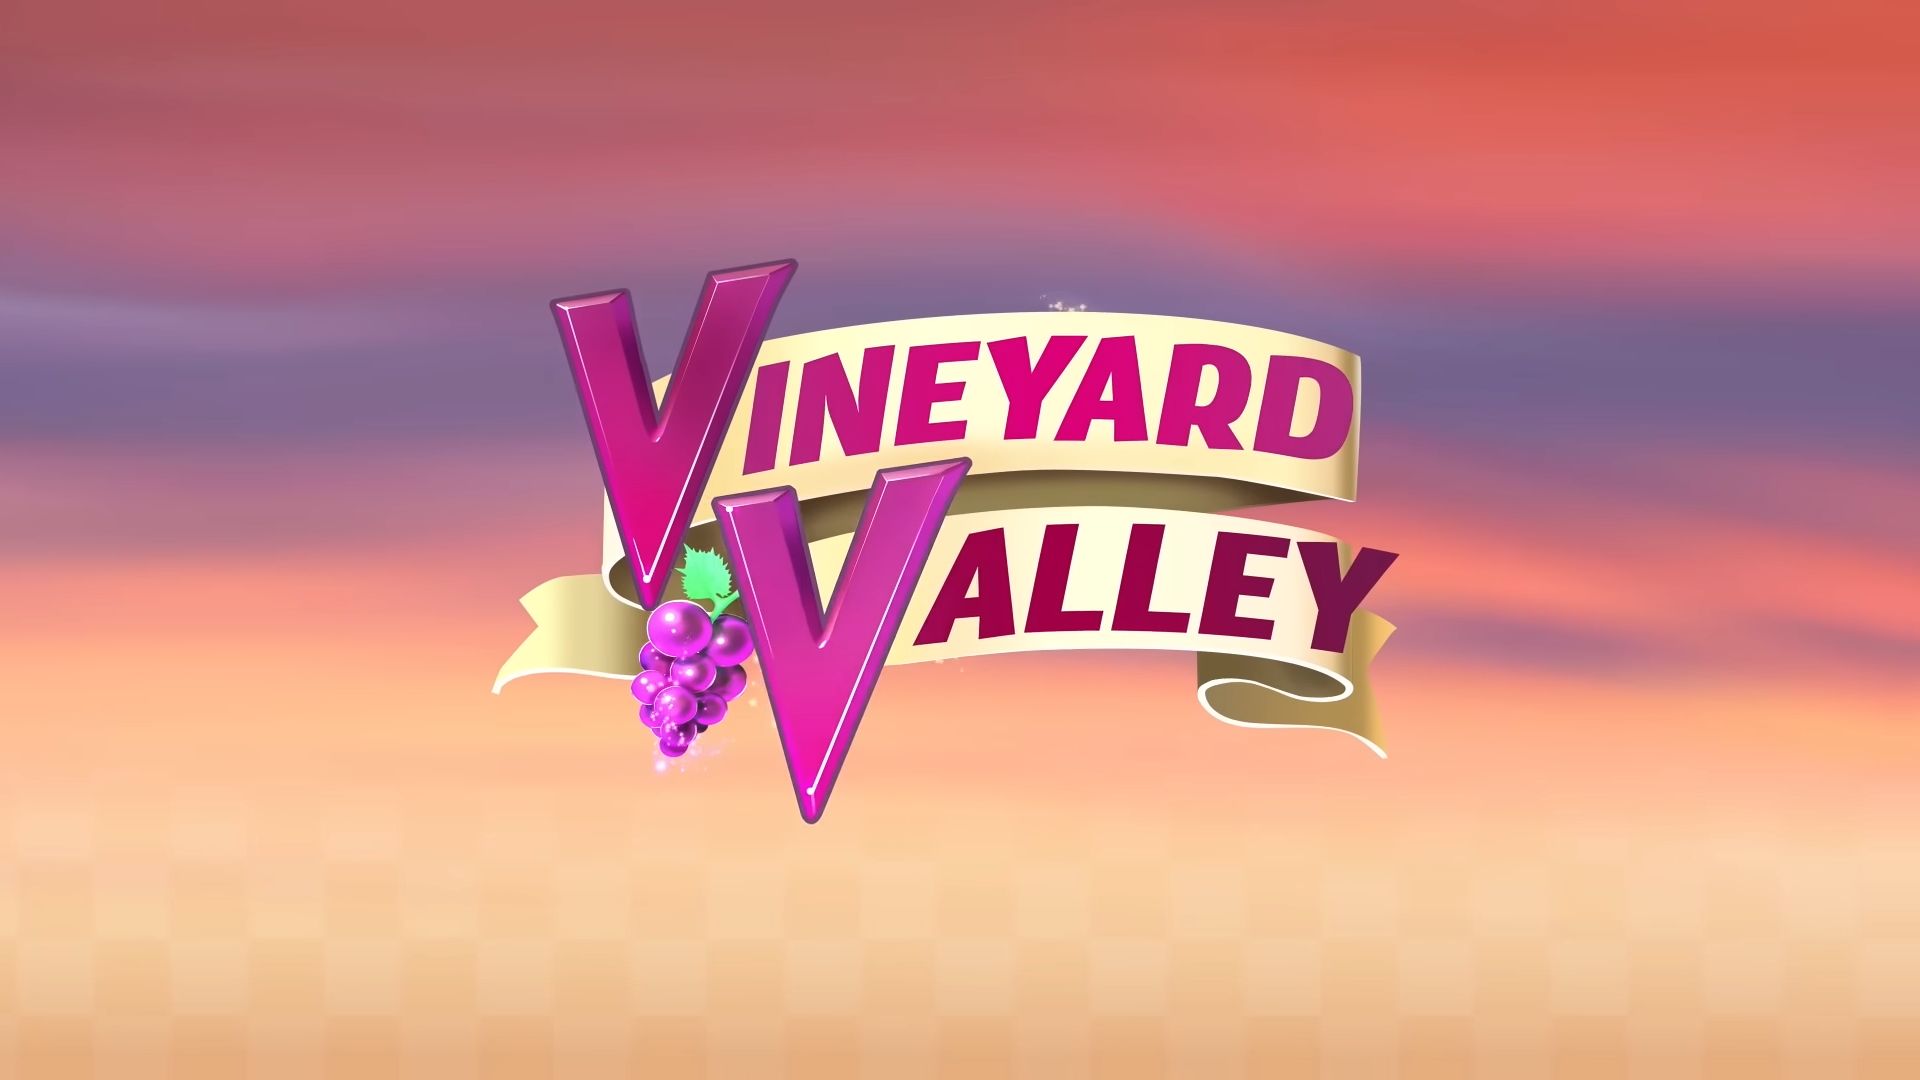 Download Vineyard Valley NETFLIX Android free game.